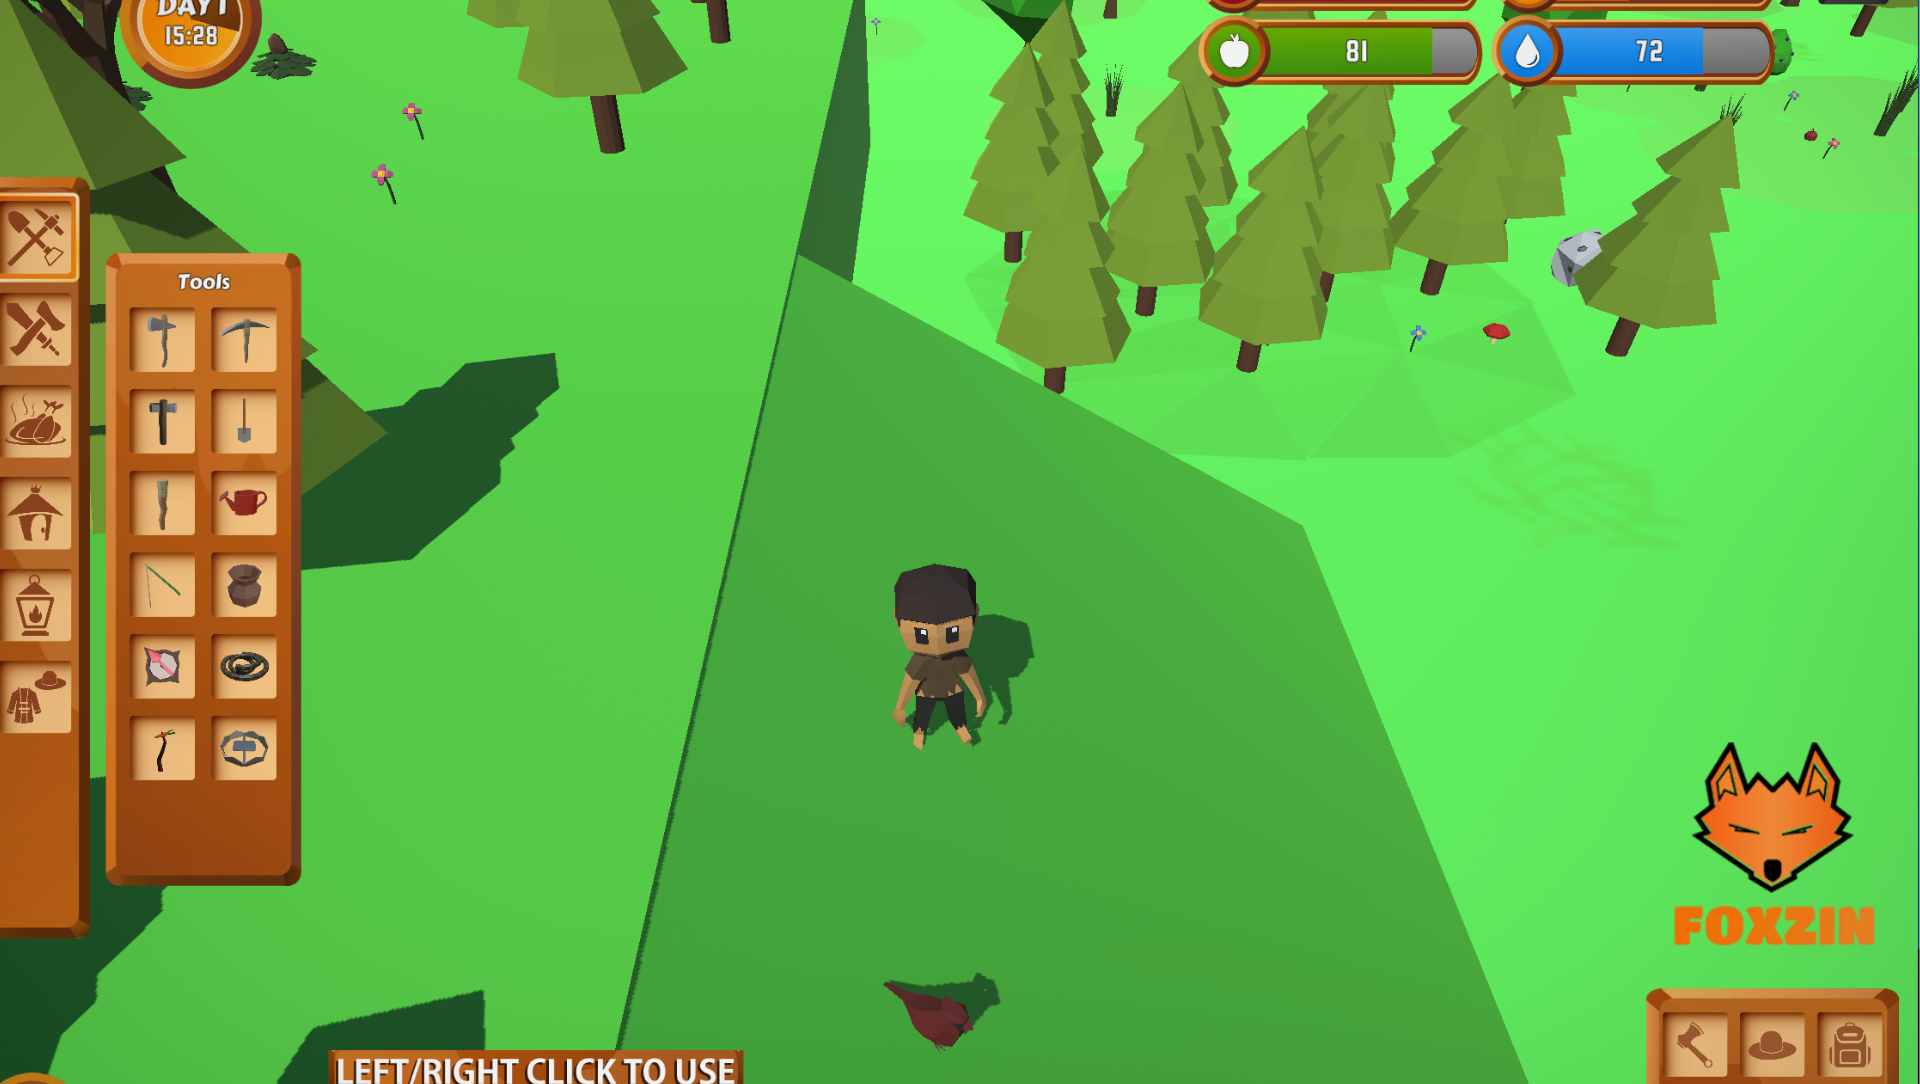 Survivalcraft 2 Day One Apk Download for Android- Latest version